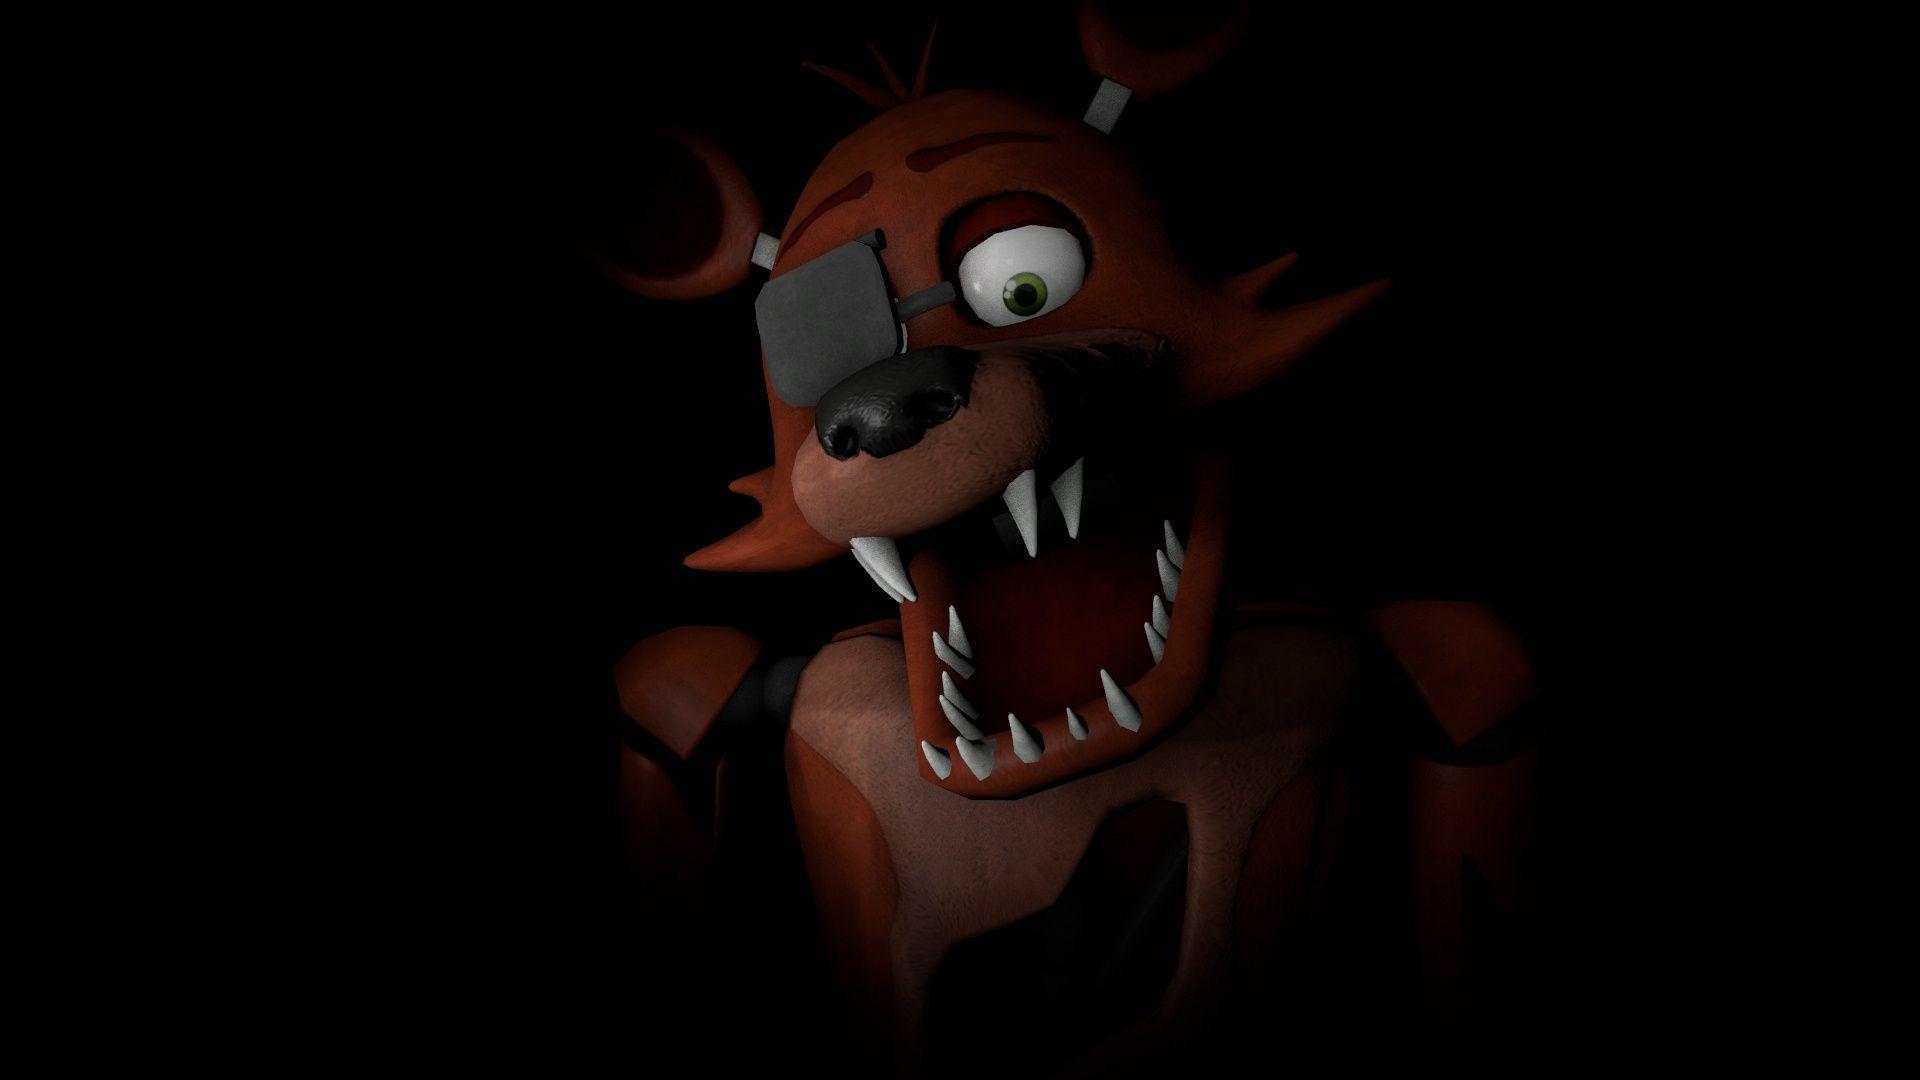 Fnaf, Horror Game, Foxy, Five Nights At Freddys, Five